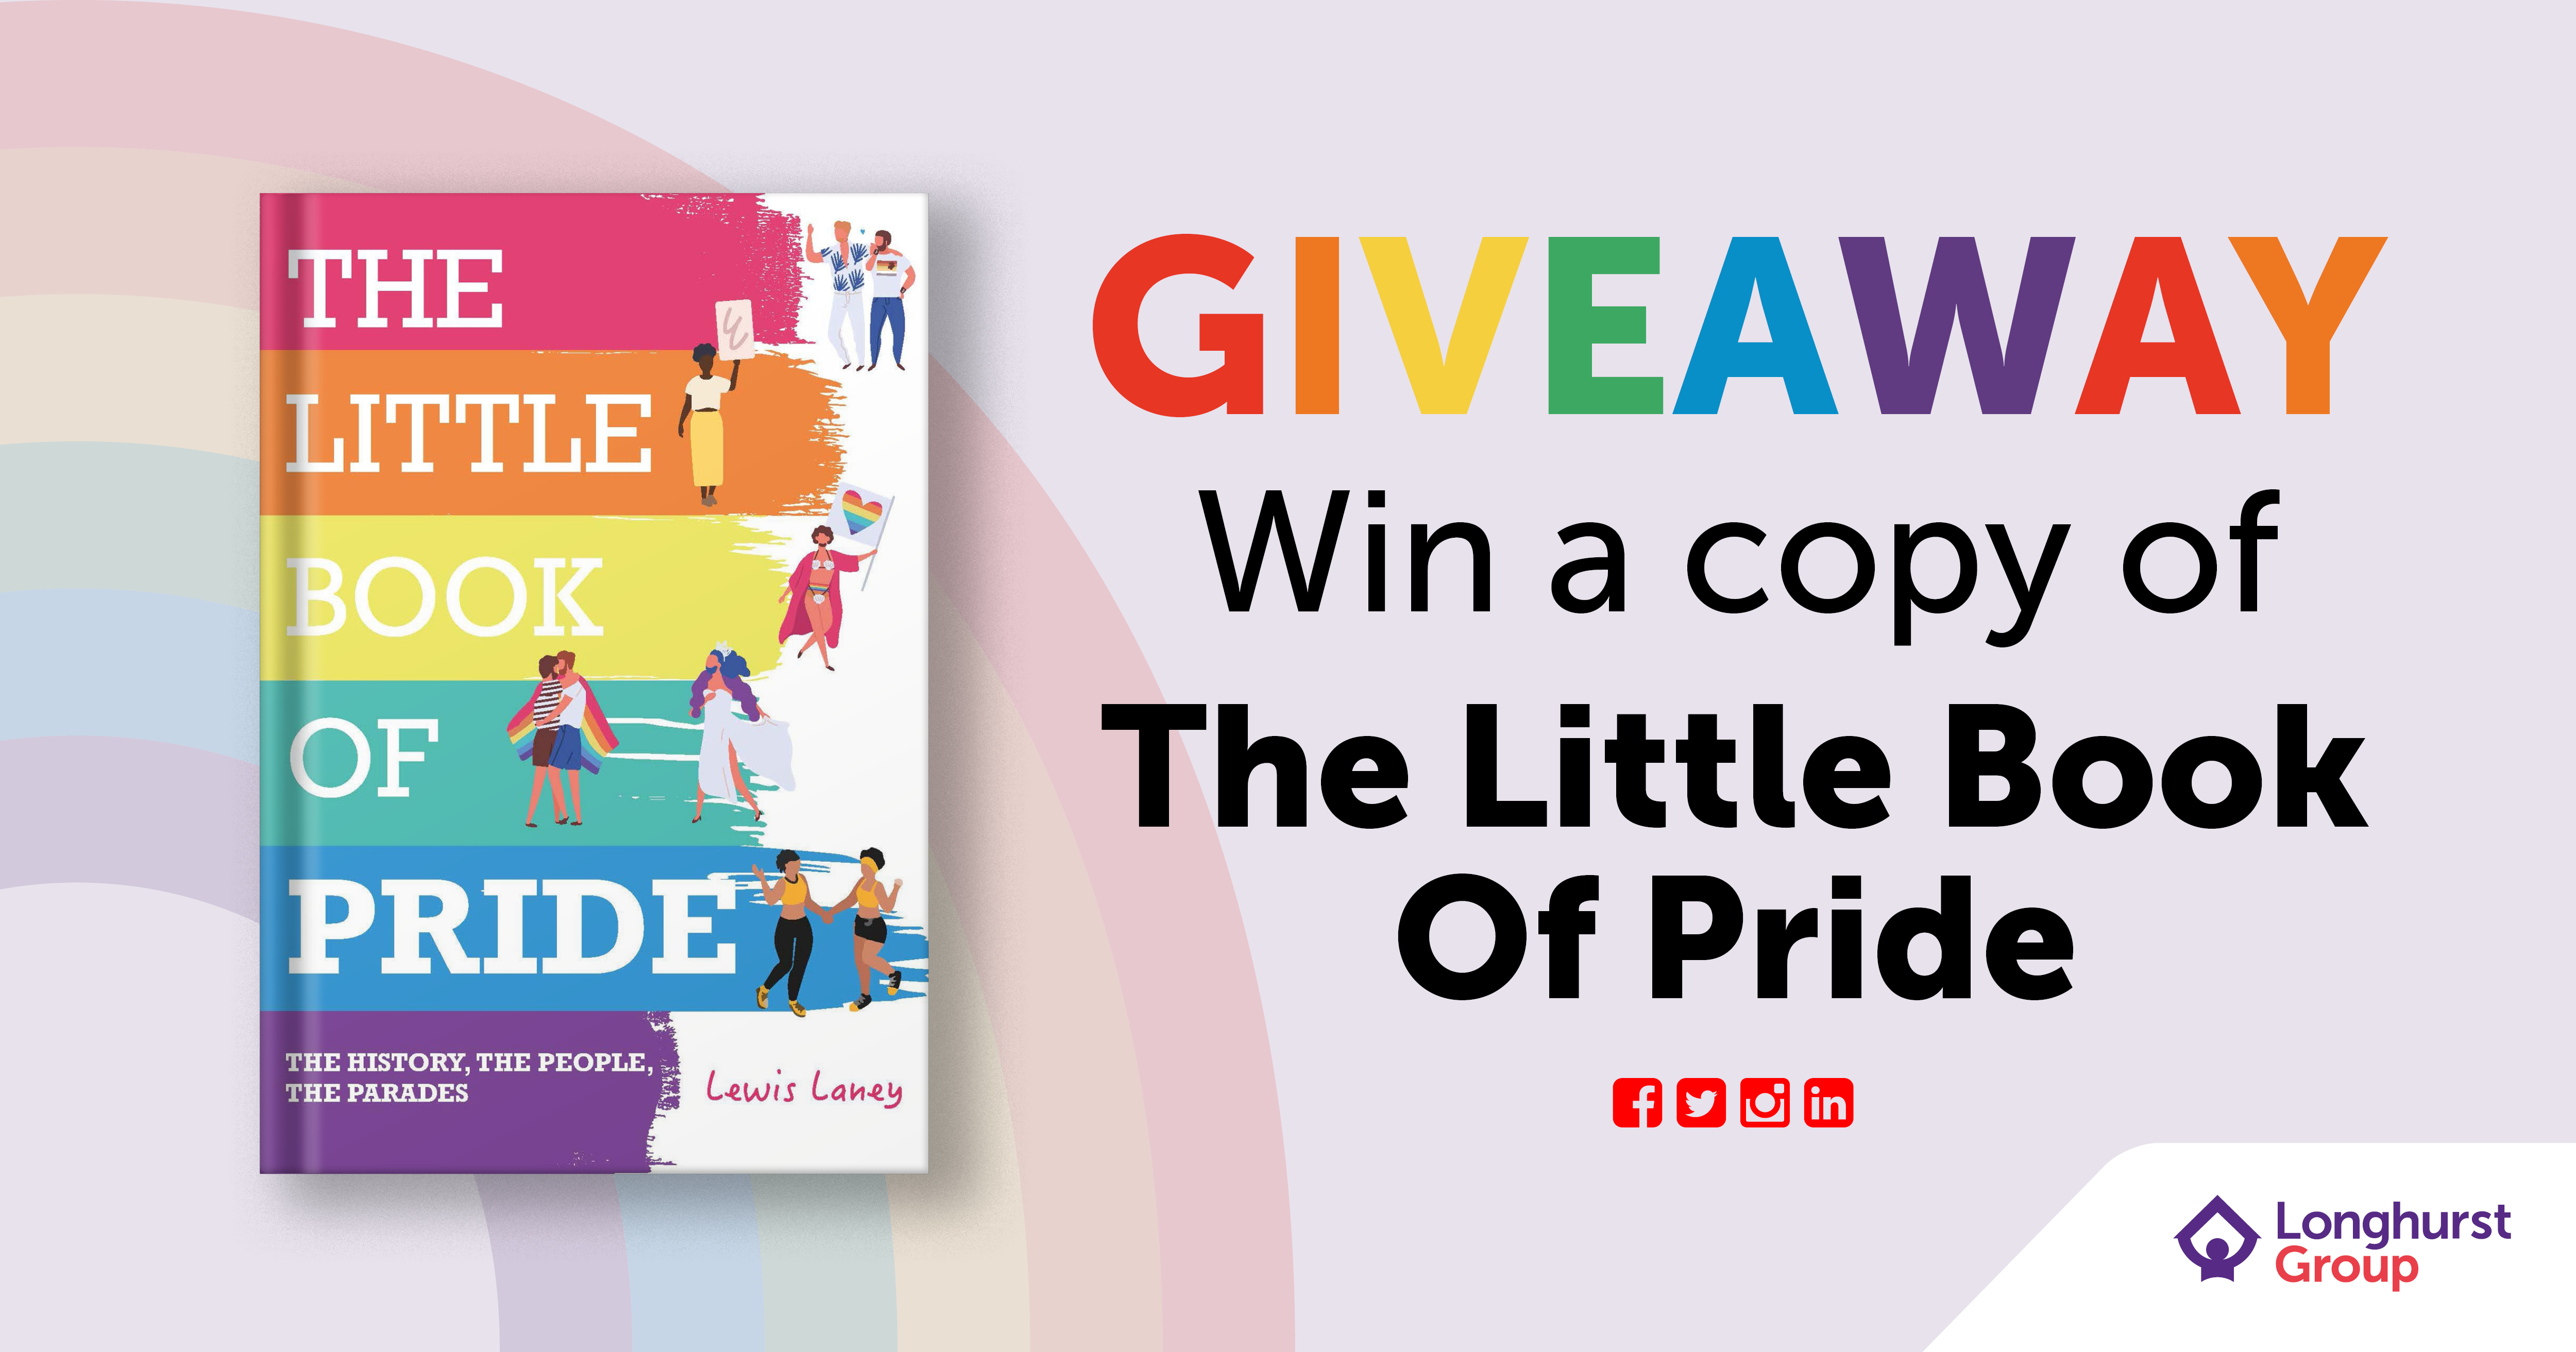 Giveaway. Win a copy of The Little Book of Pride.